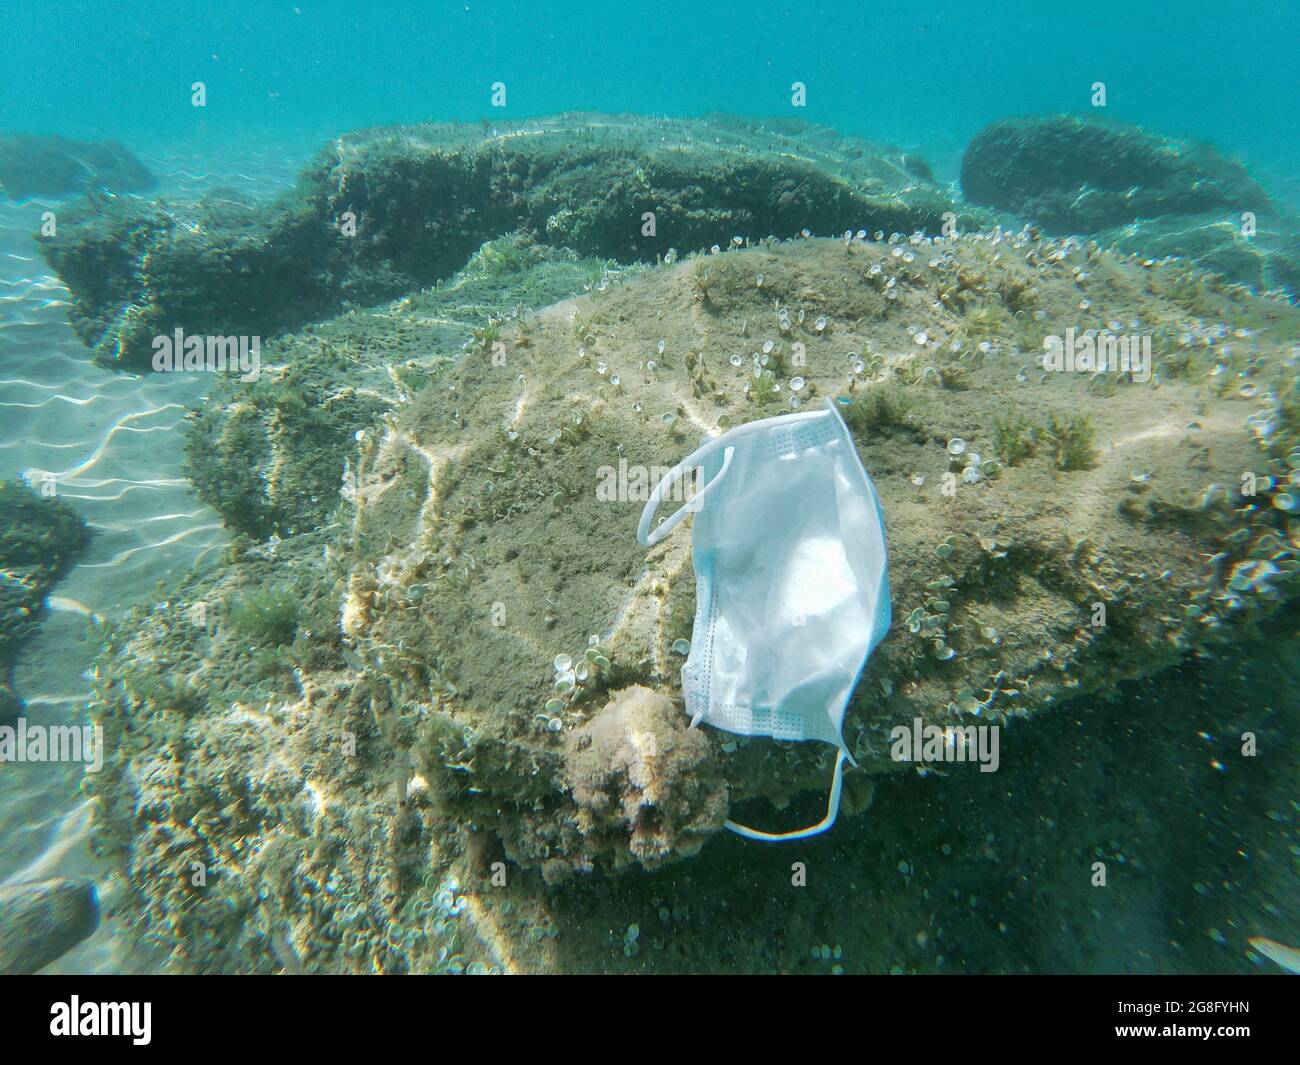 Discarded surgical face mask floating on contaminated sea ecosystem,covid19 environment pollution Stock Photo